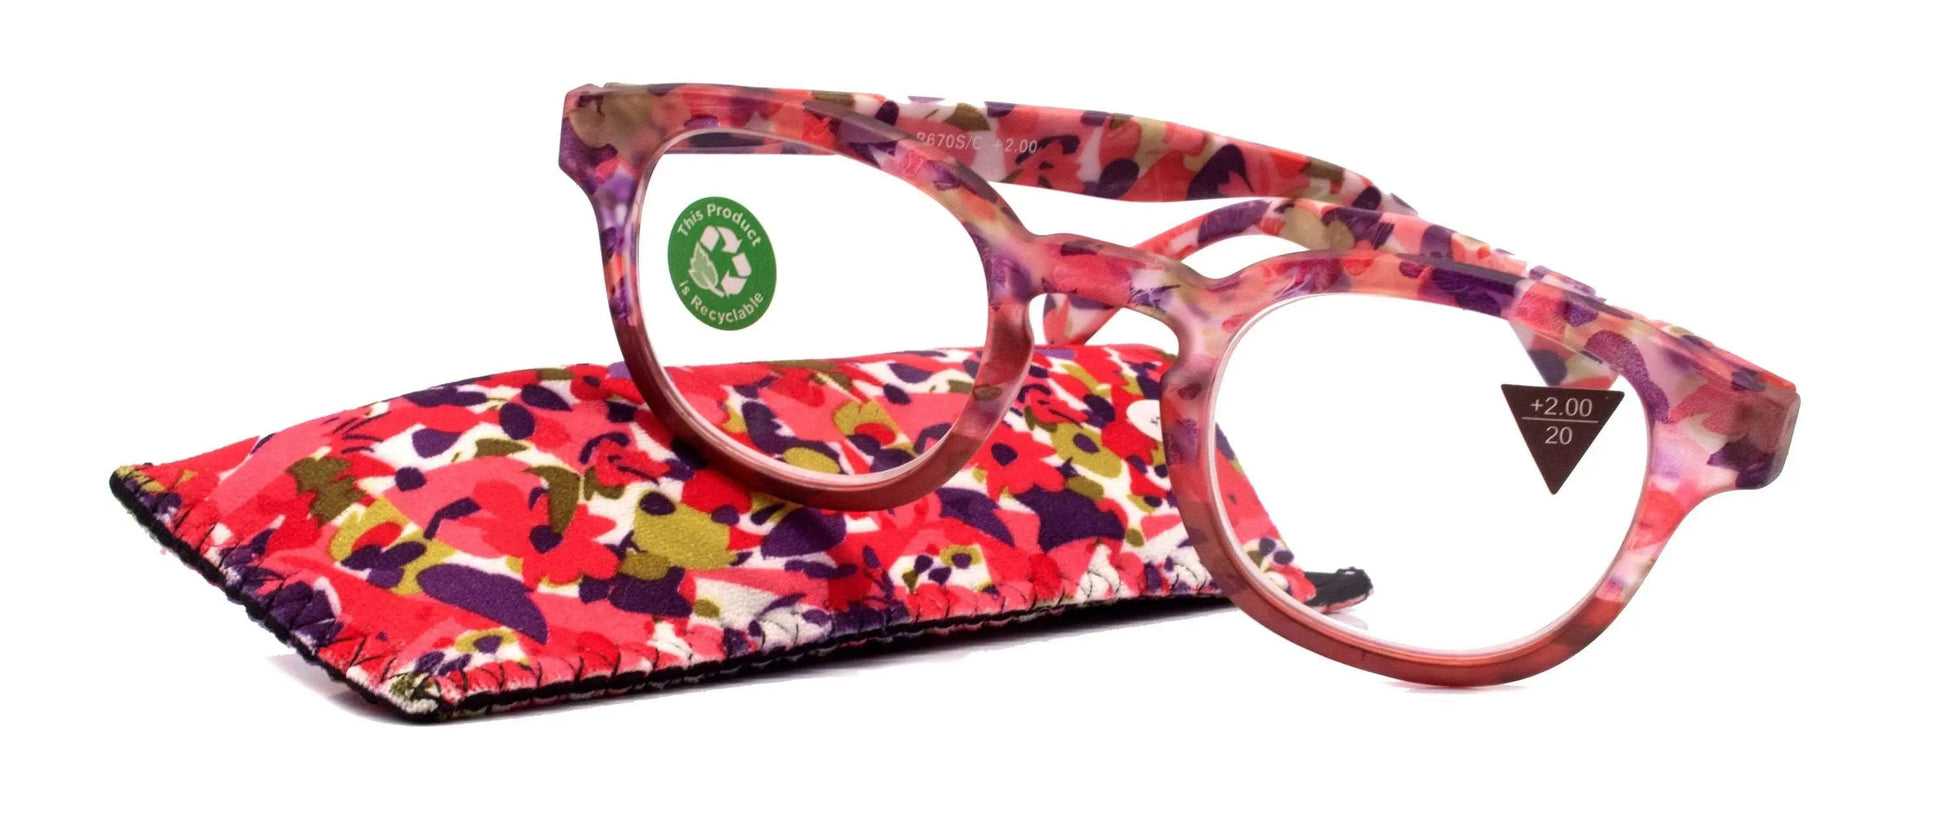 Autumn, (Premium) Reading Glasses High End Readers +1.25, +1.50 to +3.00 Round Style. optical Frame, (Pink, Purple Floral) NY Fifth Avenue.